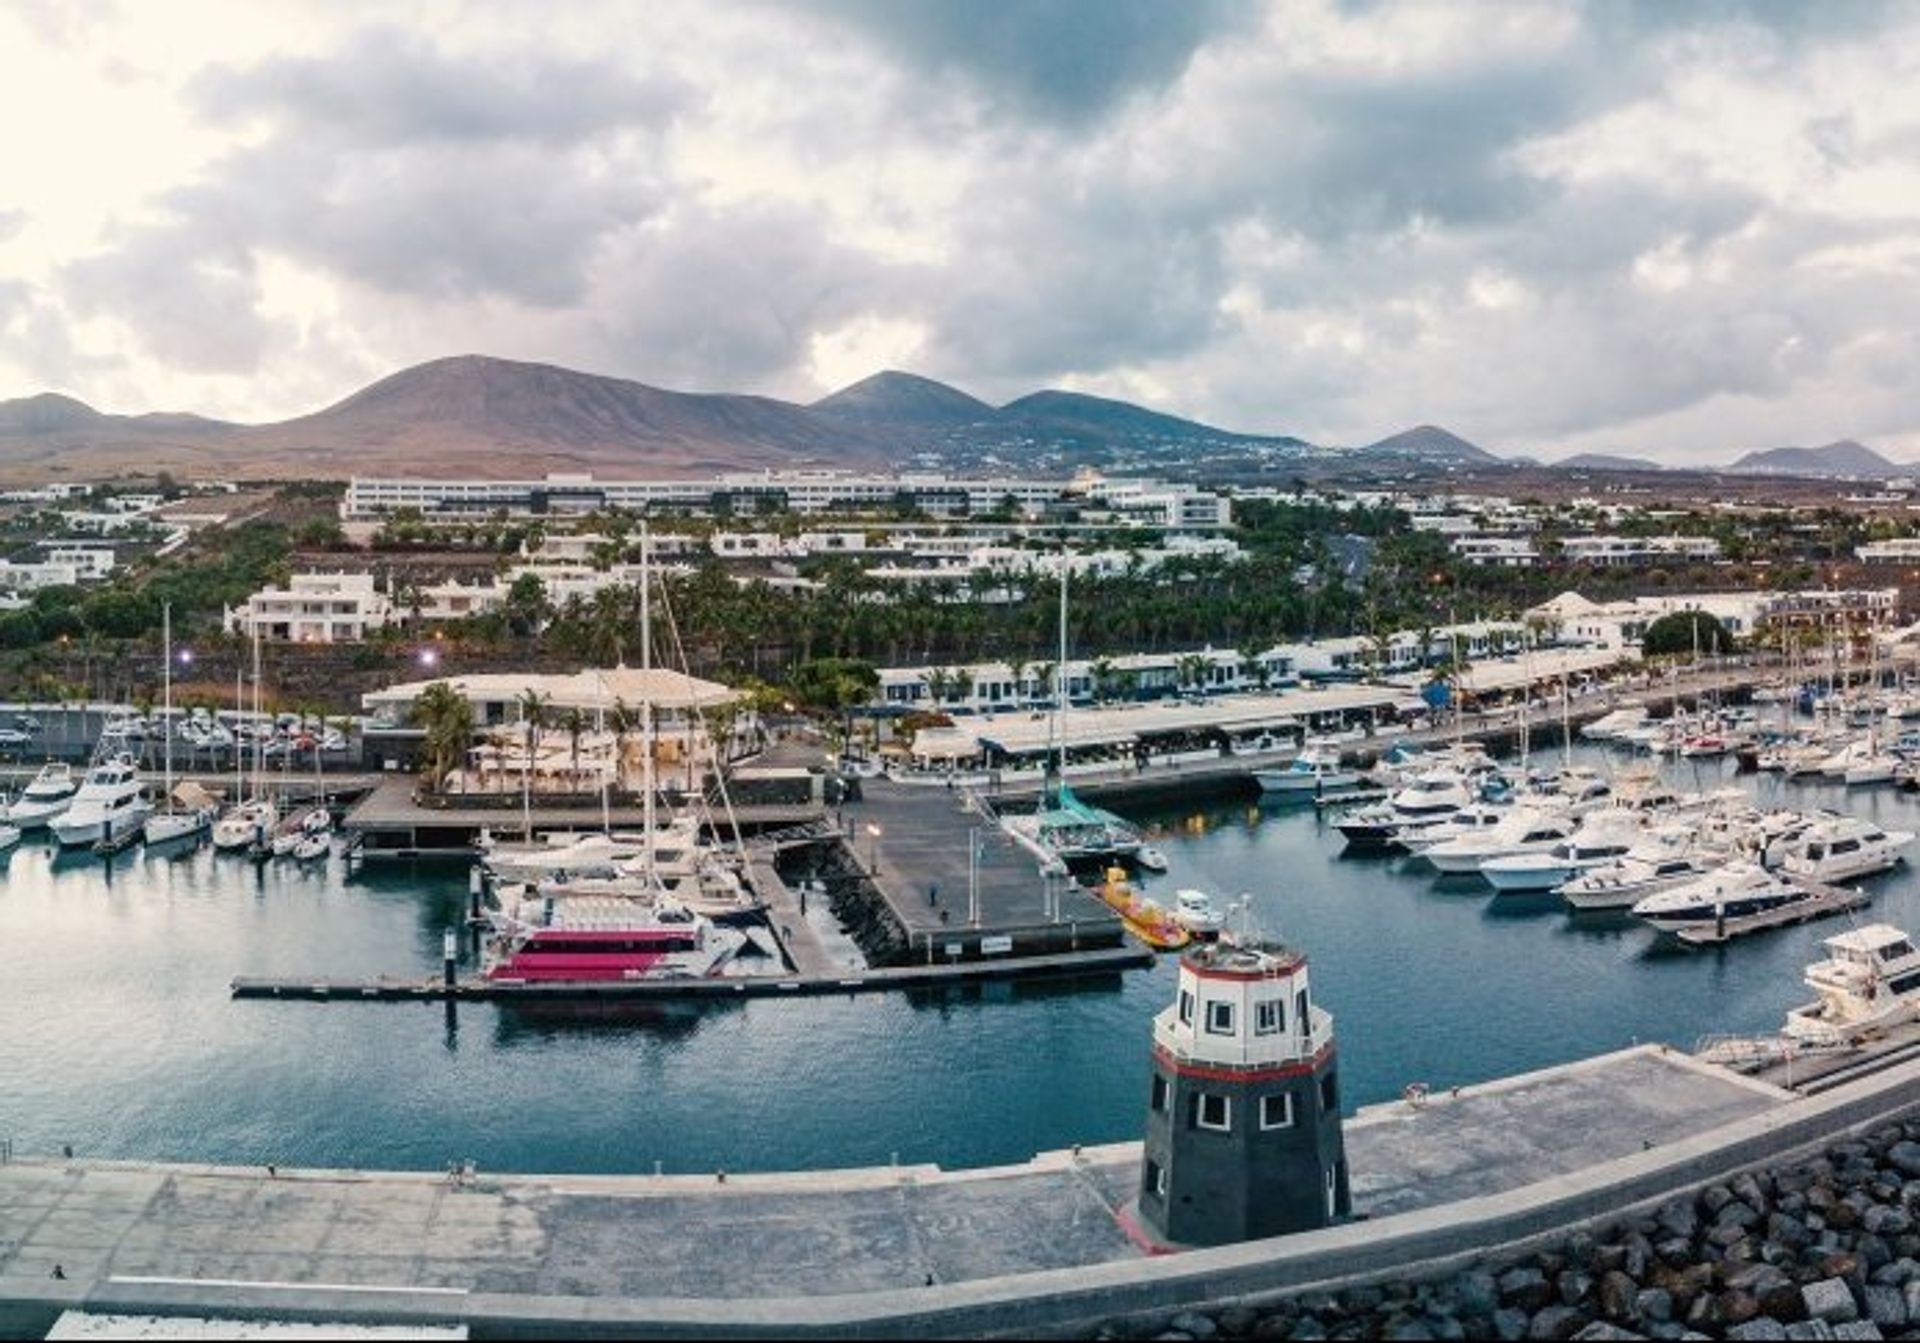 Puerto Calero is scattered with sophisticated bars, boutiques and restaurants, with a beautiful mountain backdrop